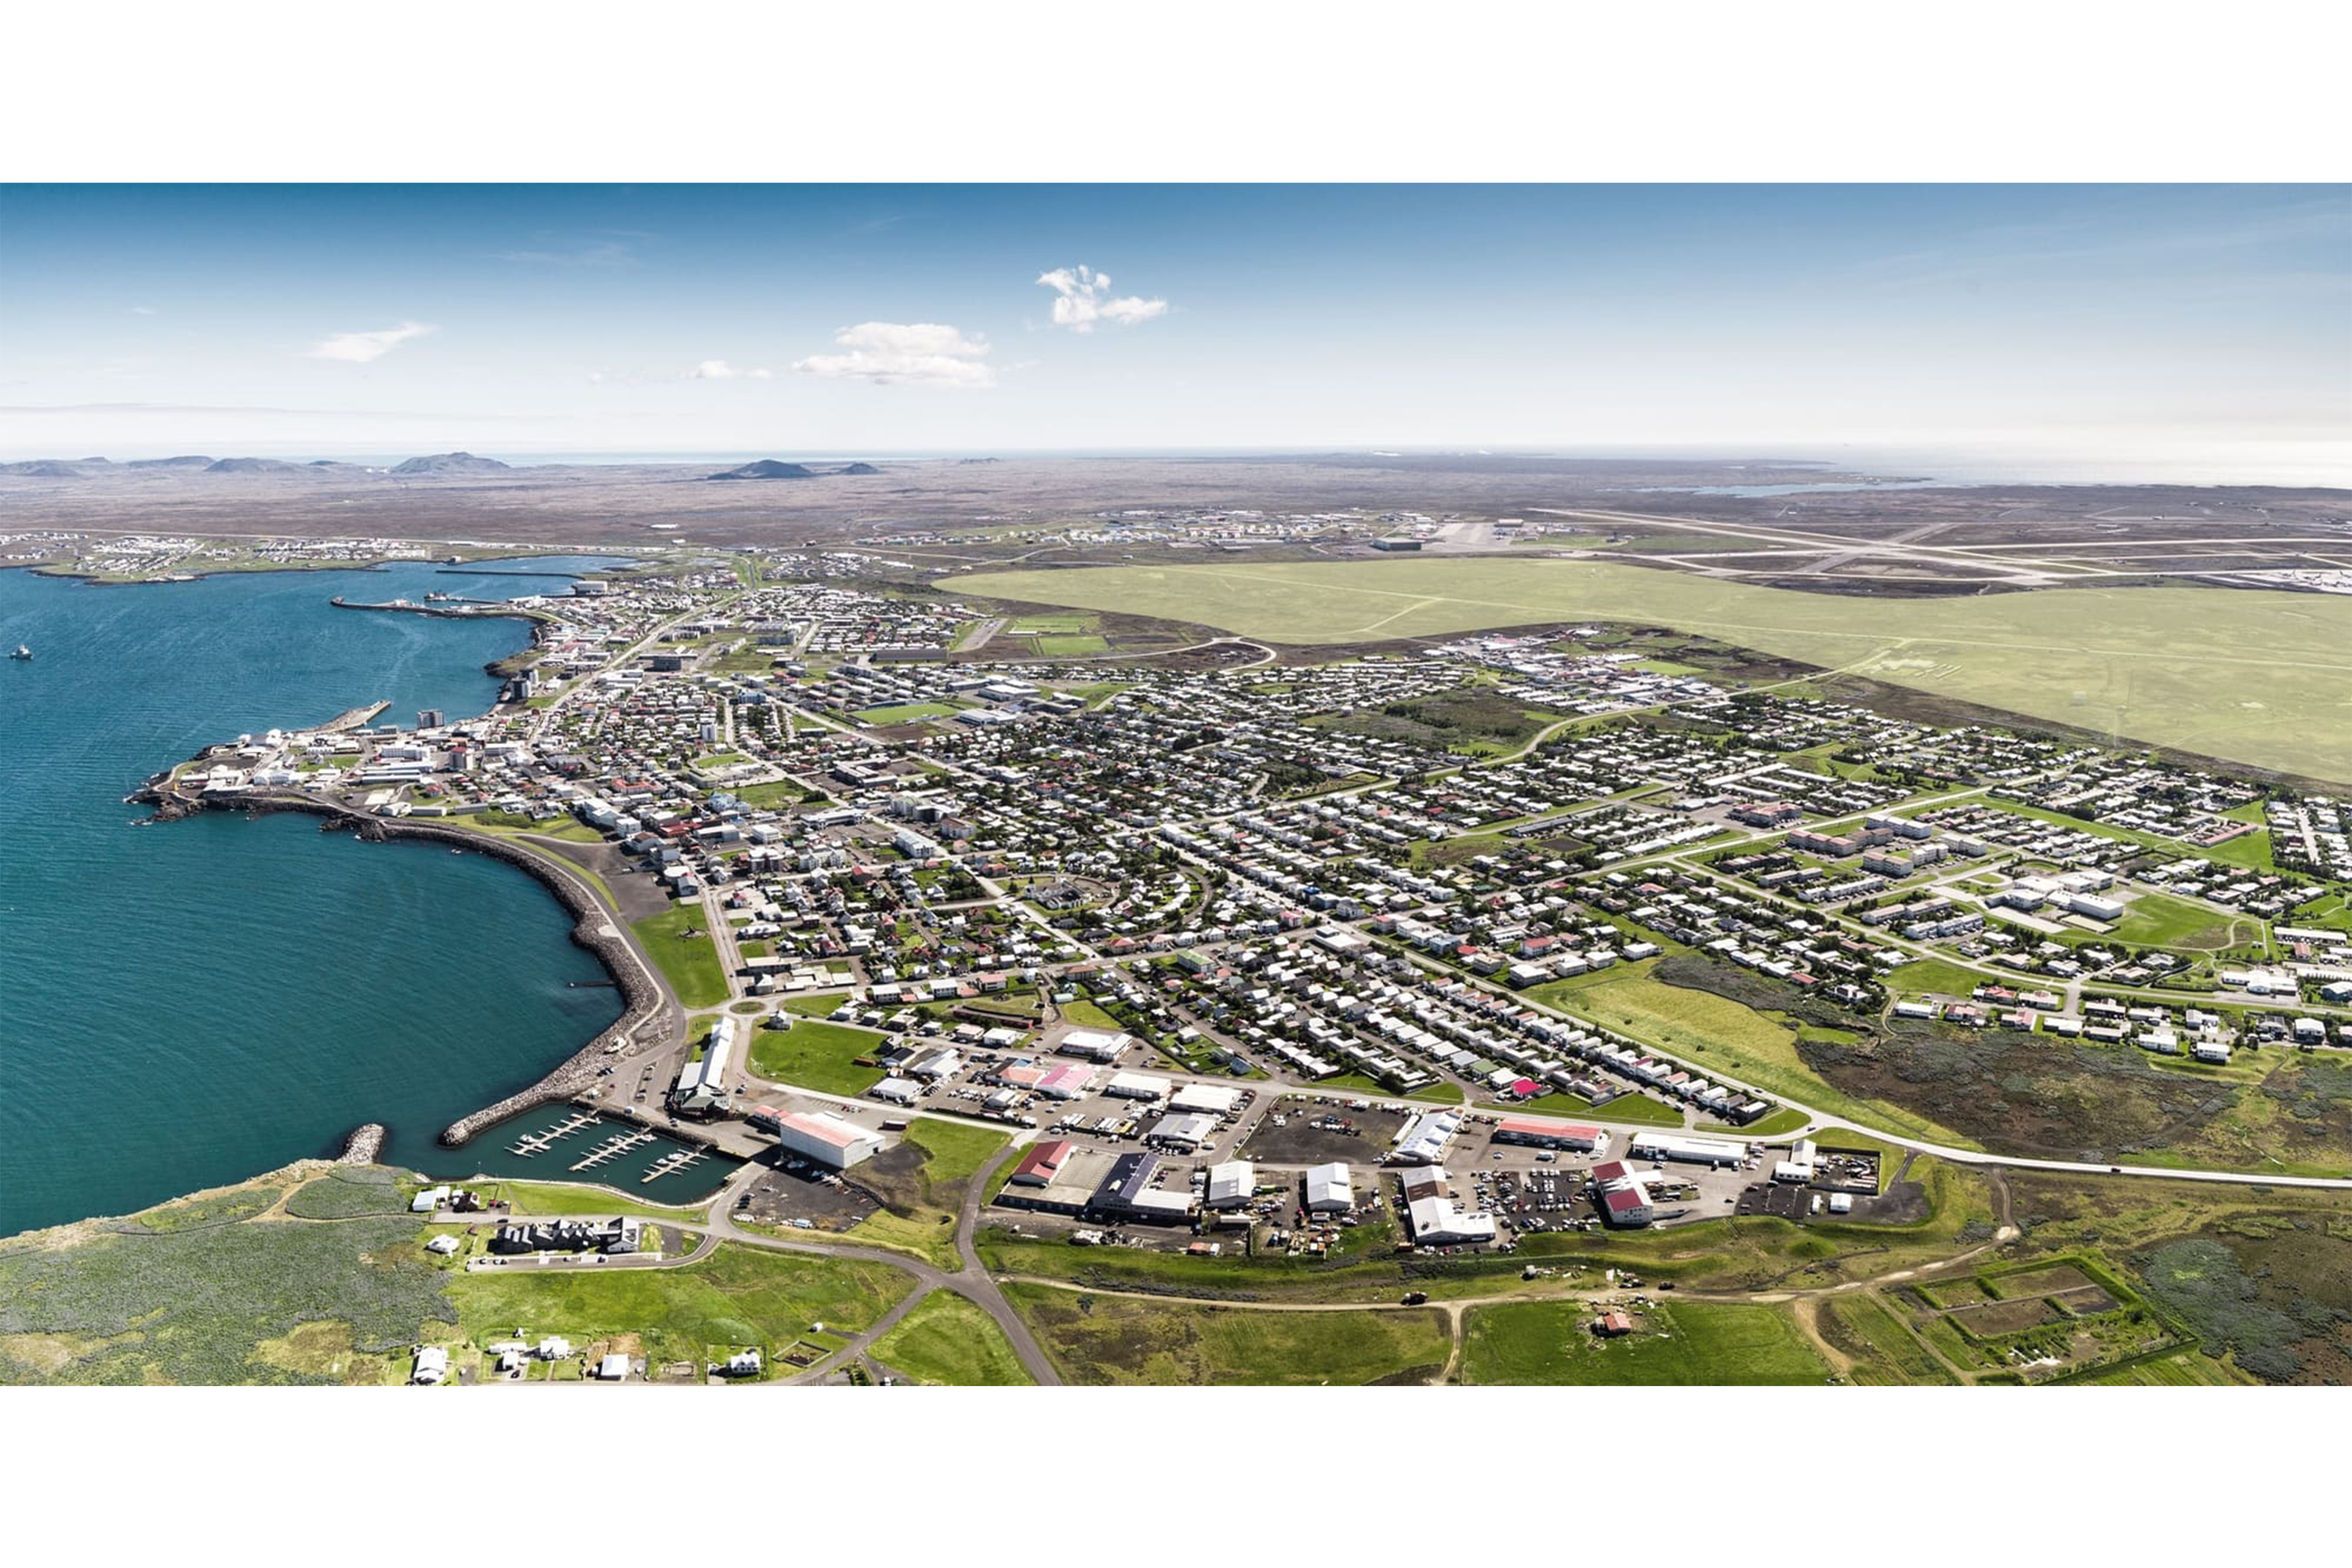 Team led by KCAP pre-qualified for Keflavik Airport Area Masterplan, Iceland! 